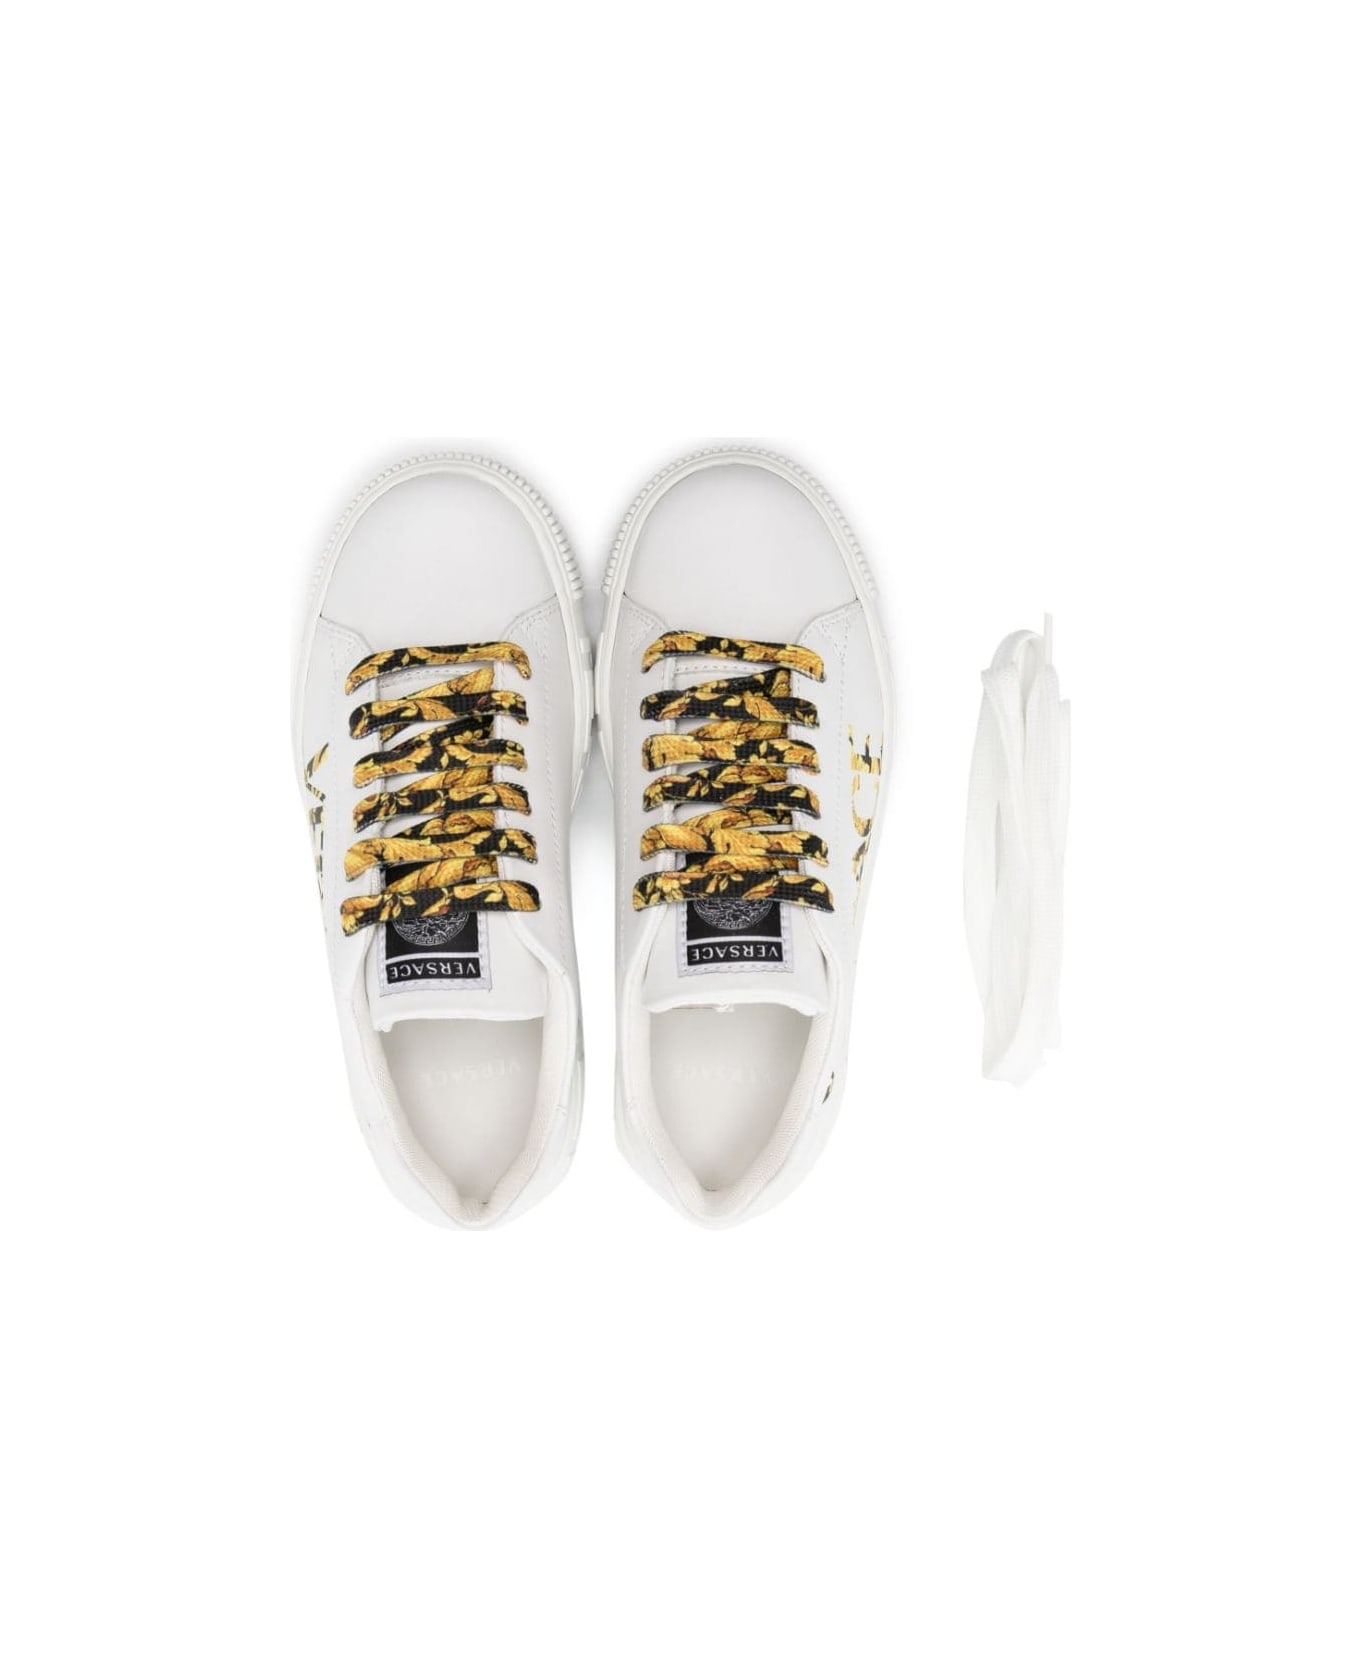 Versace Sneakers Bianche In Pelle Bambina - Bianco